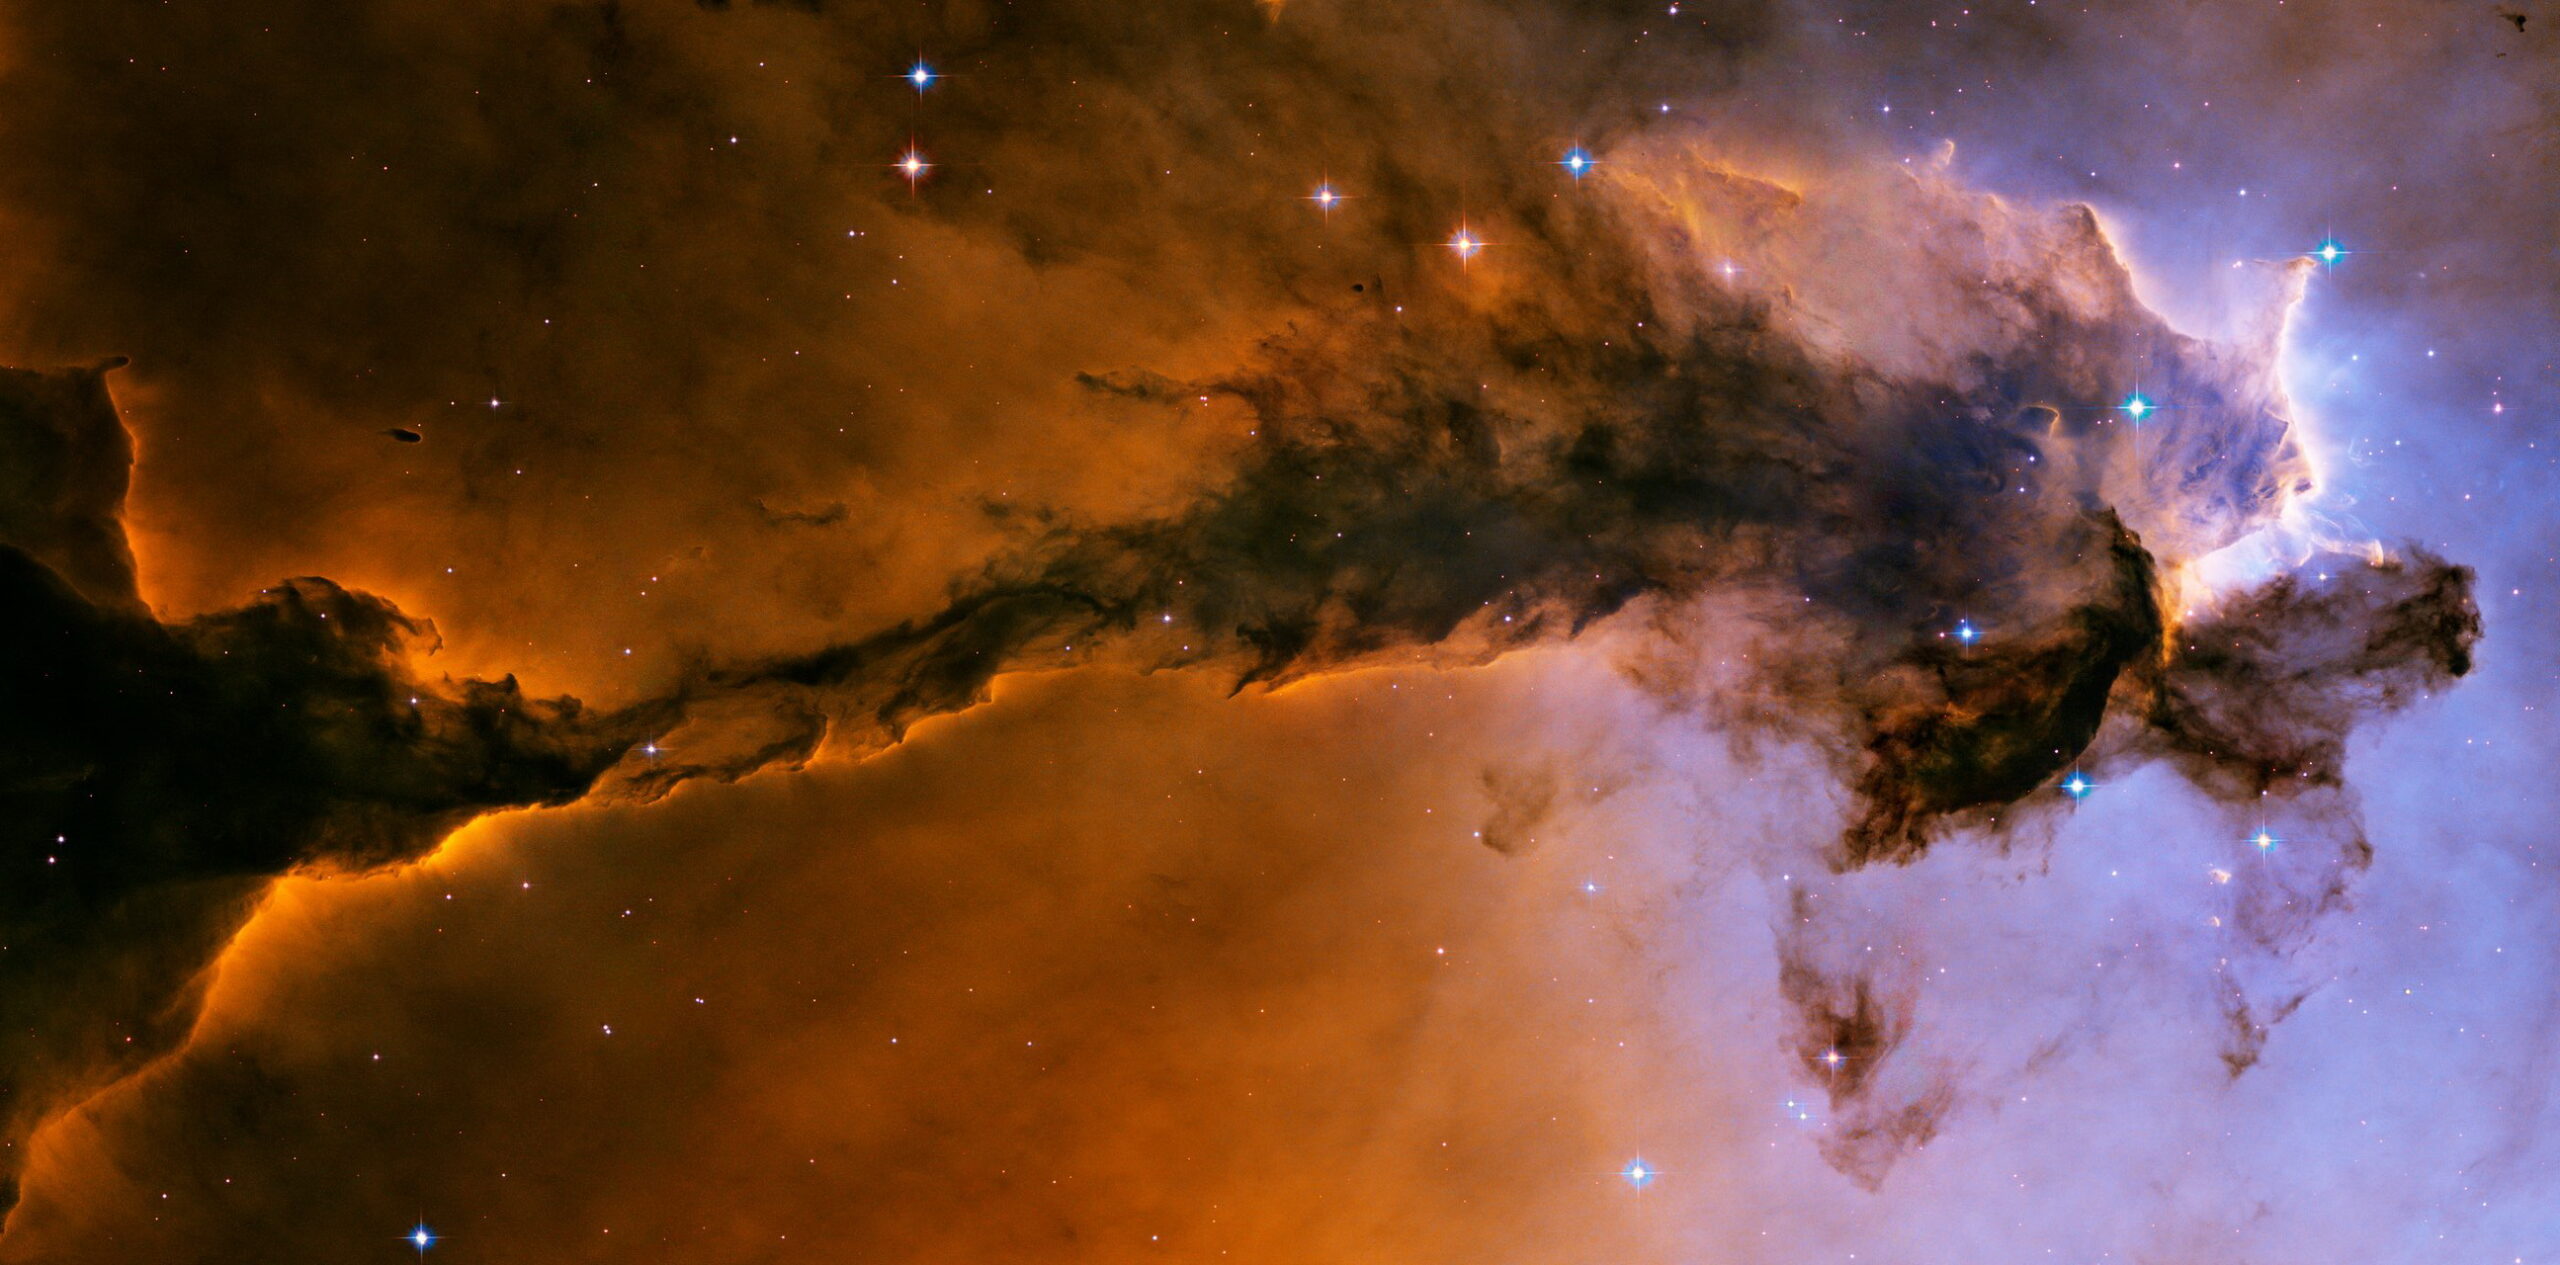 m16 hubble heic0506b 1 scaled